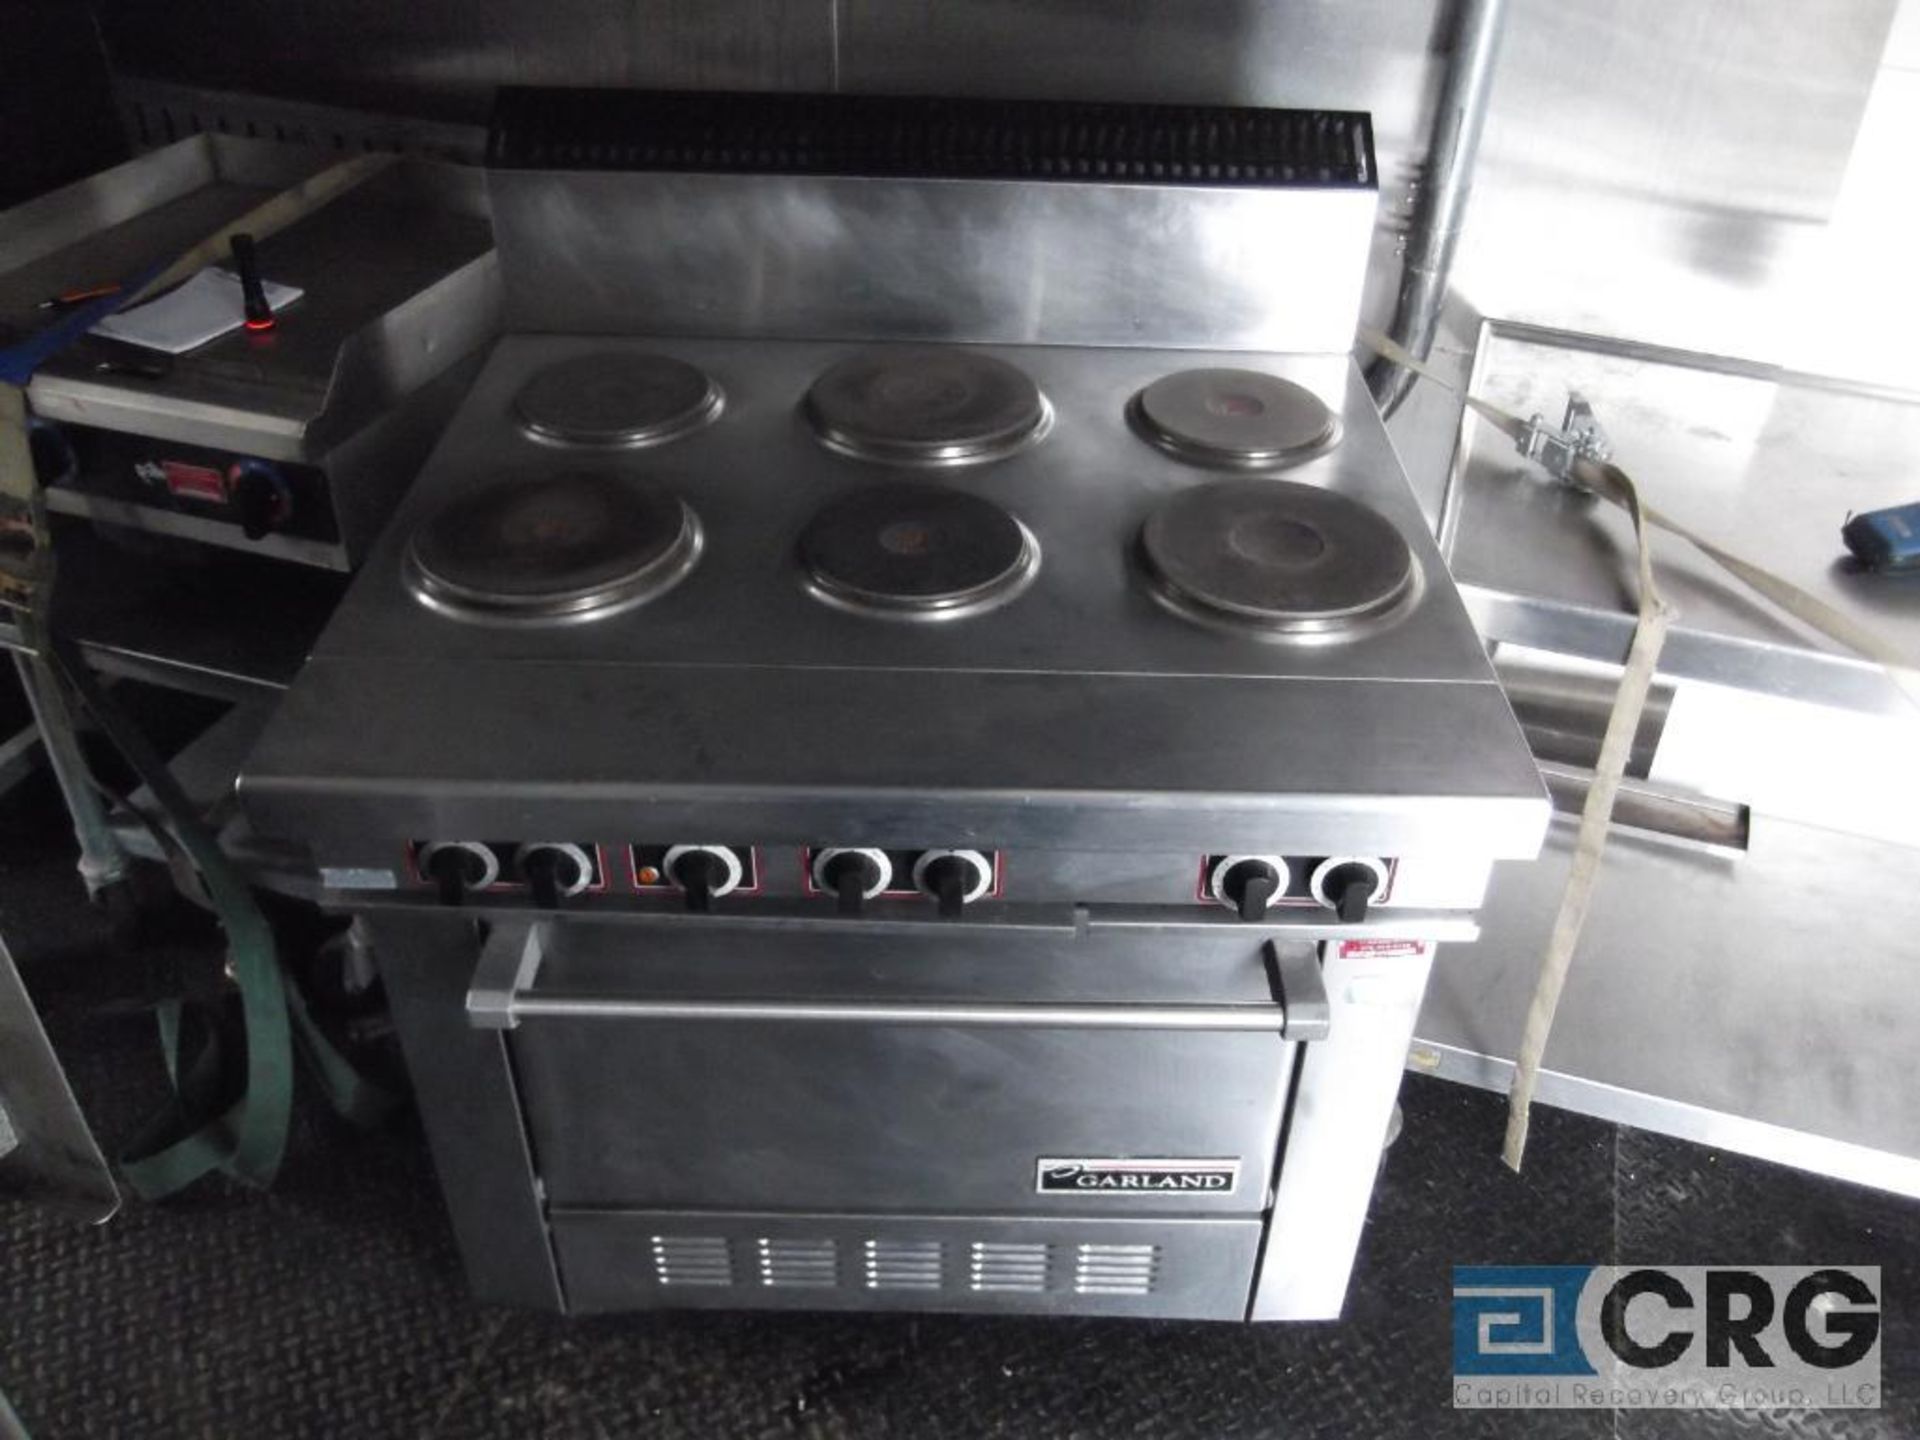 Electric Range with Convection Oven